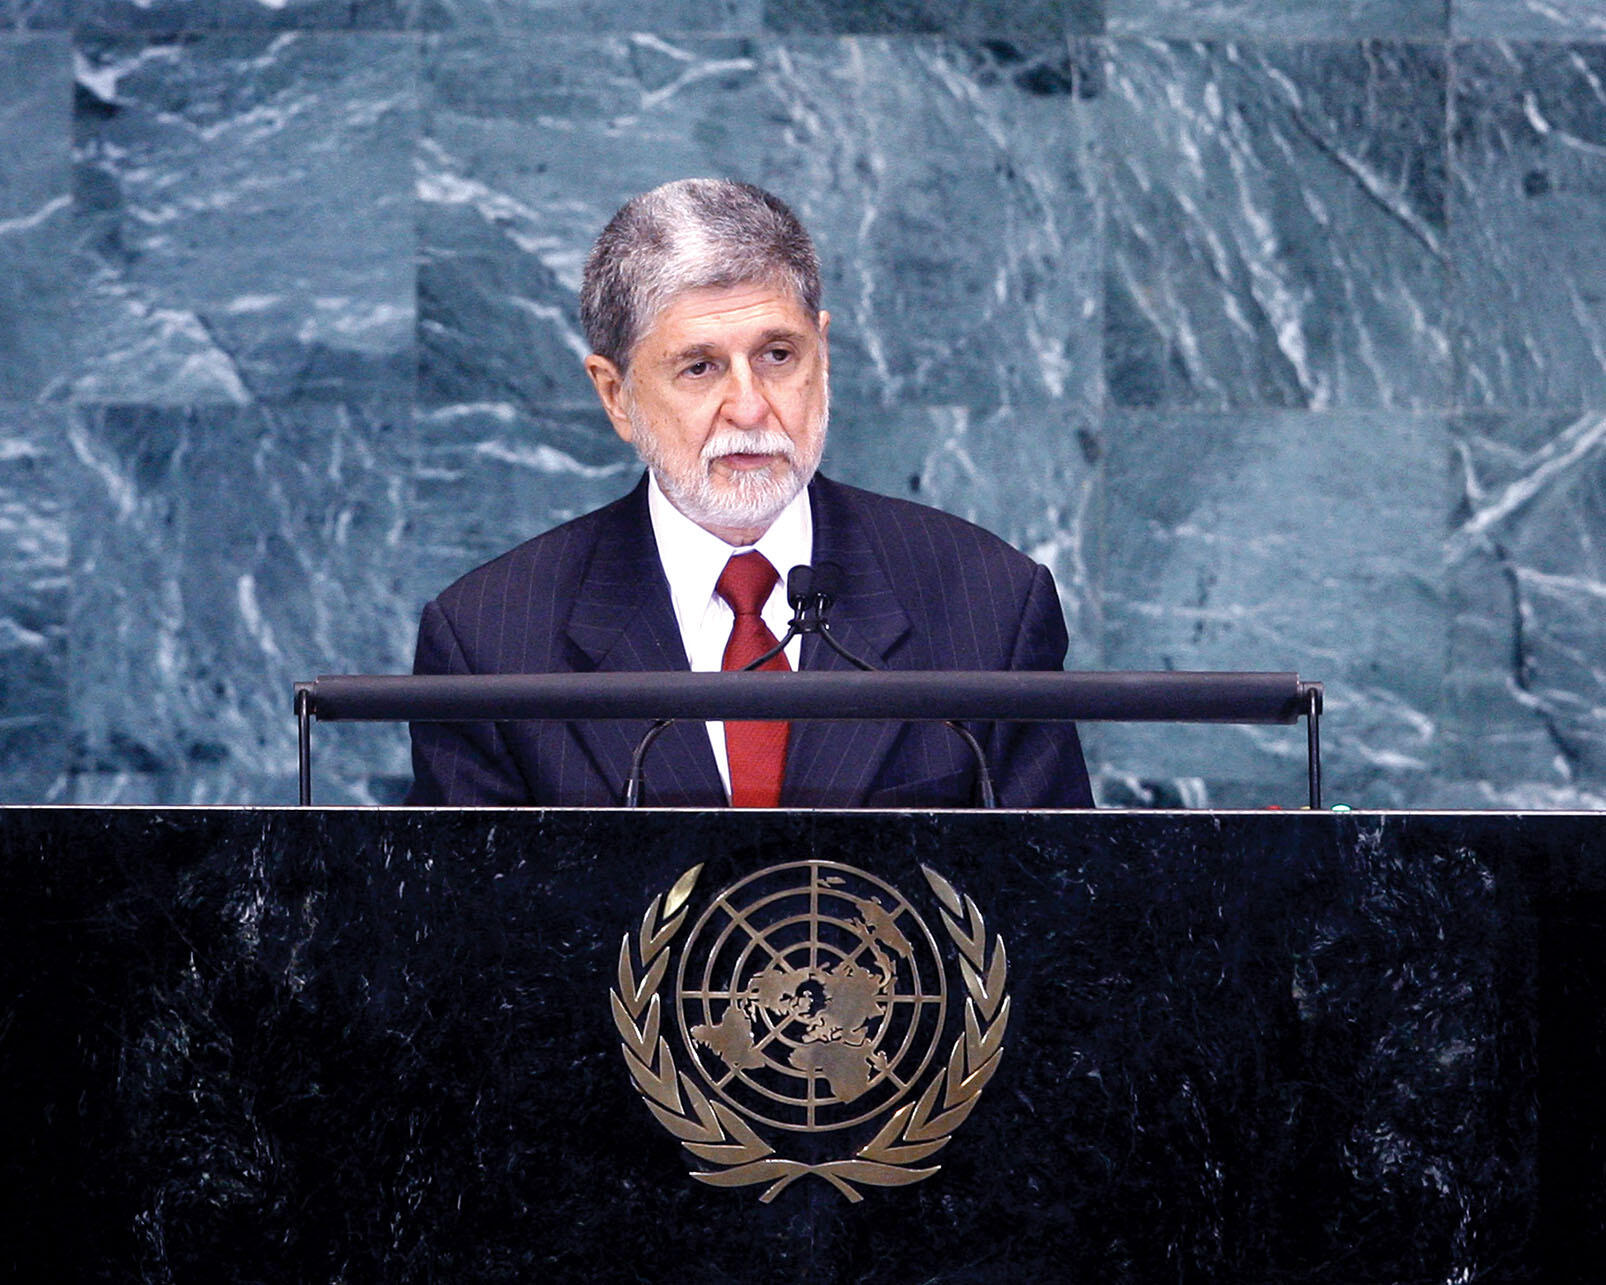 Brazilian Foreign Minister Celso Amorim speaks at the main dais in the General Assembly at the United Nations in 2010. (Photo courtesy of UN Photo).